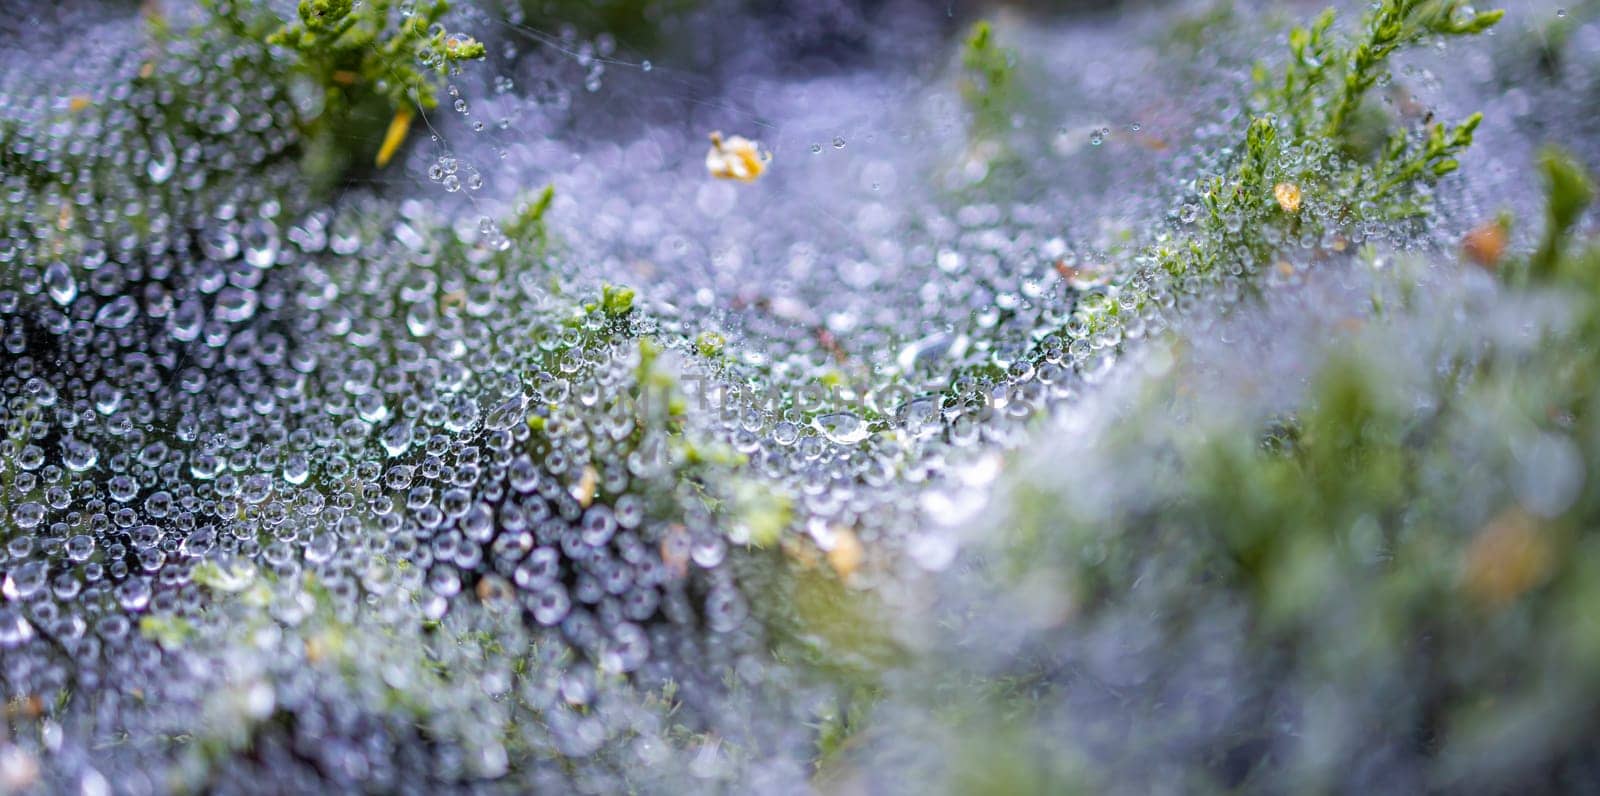 Morning dew on a cobweb among the bushes by Wierzchu